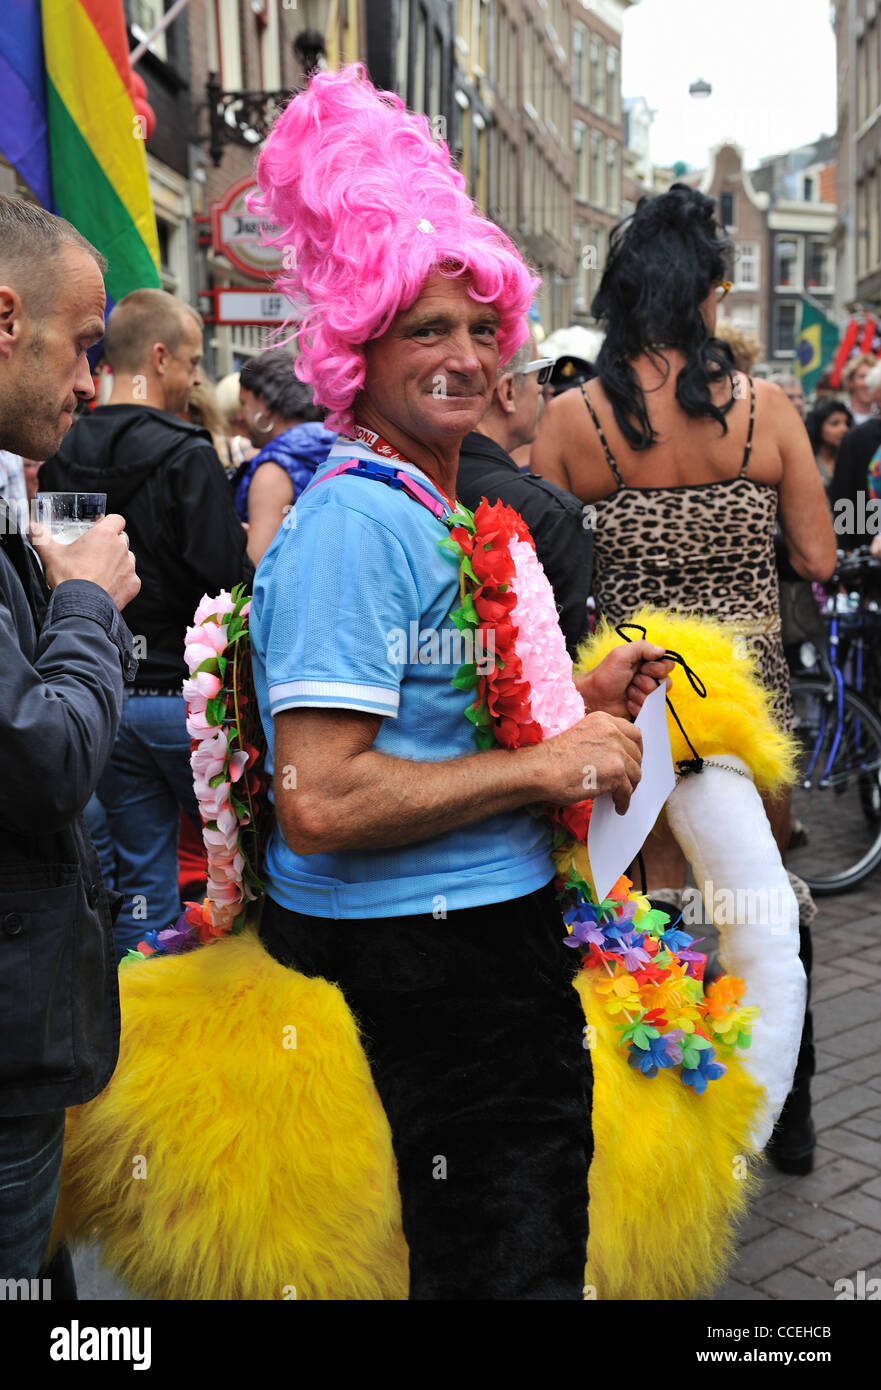 Homme portant perruque rose, Amsterdam, Pays-Bas Photo Stock - Alamy